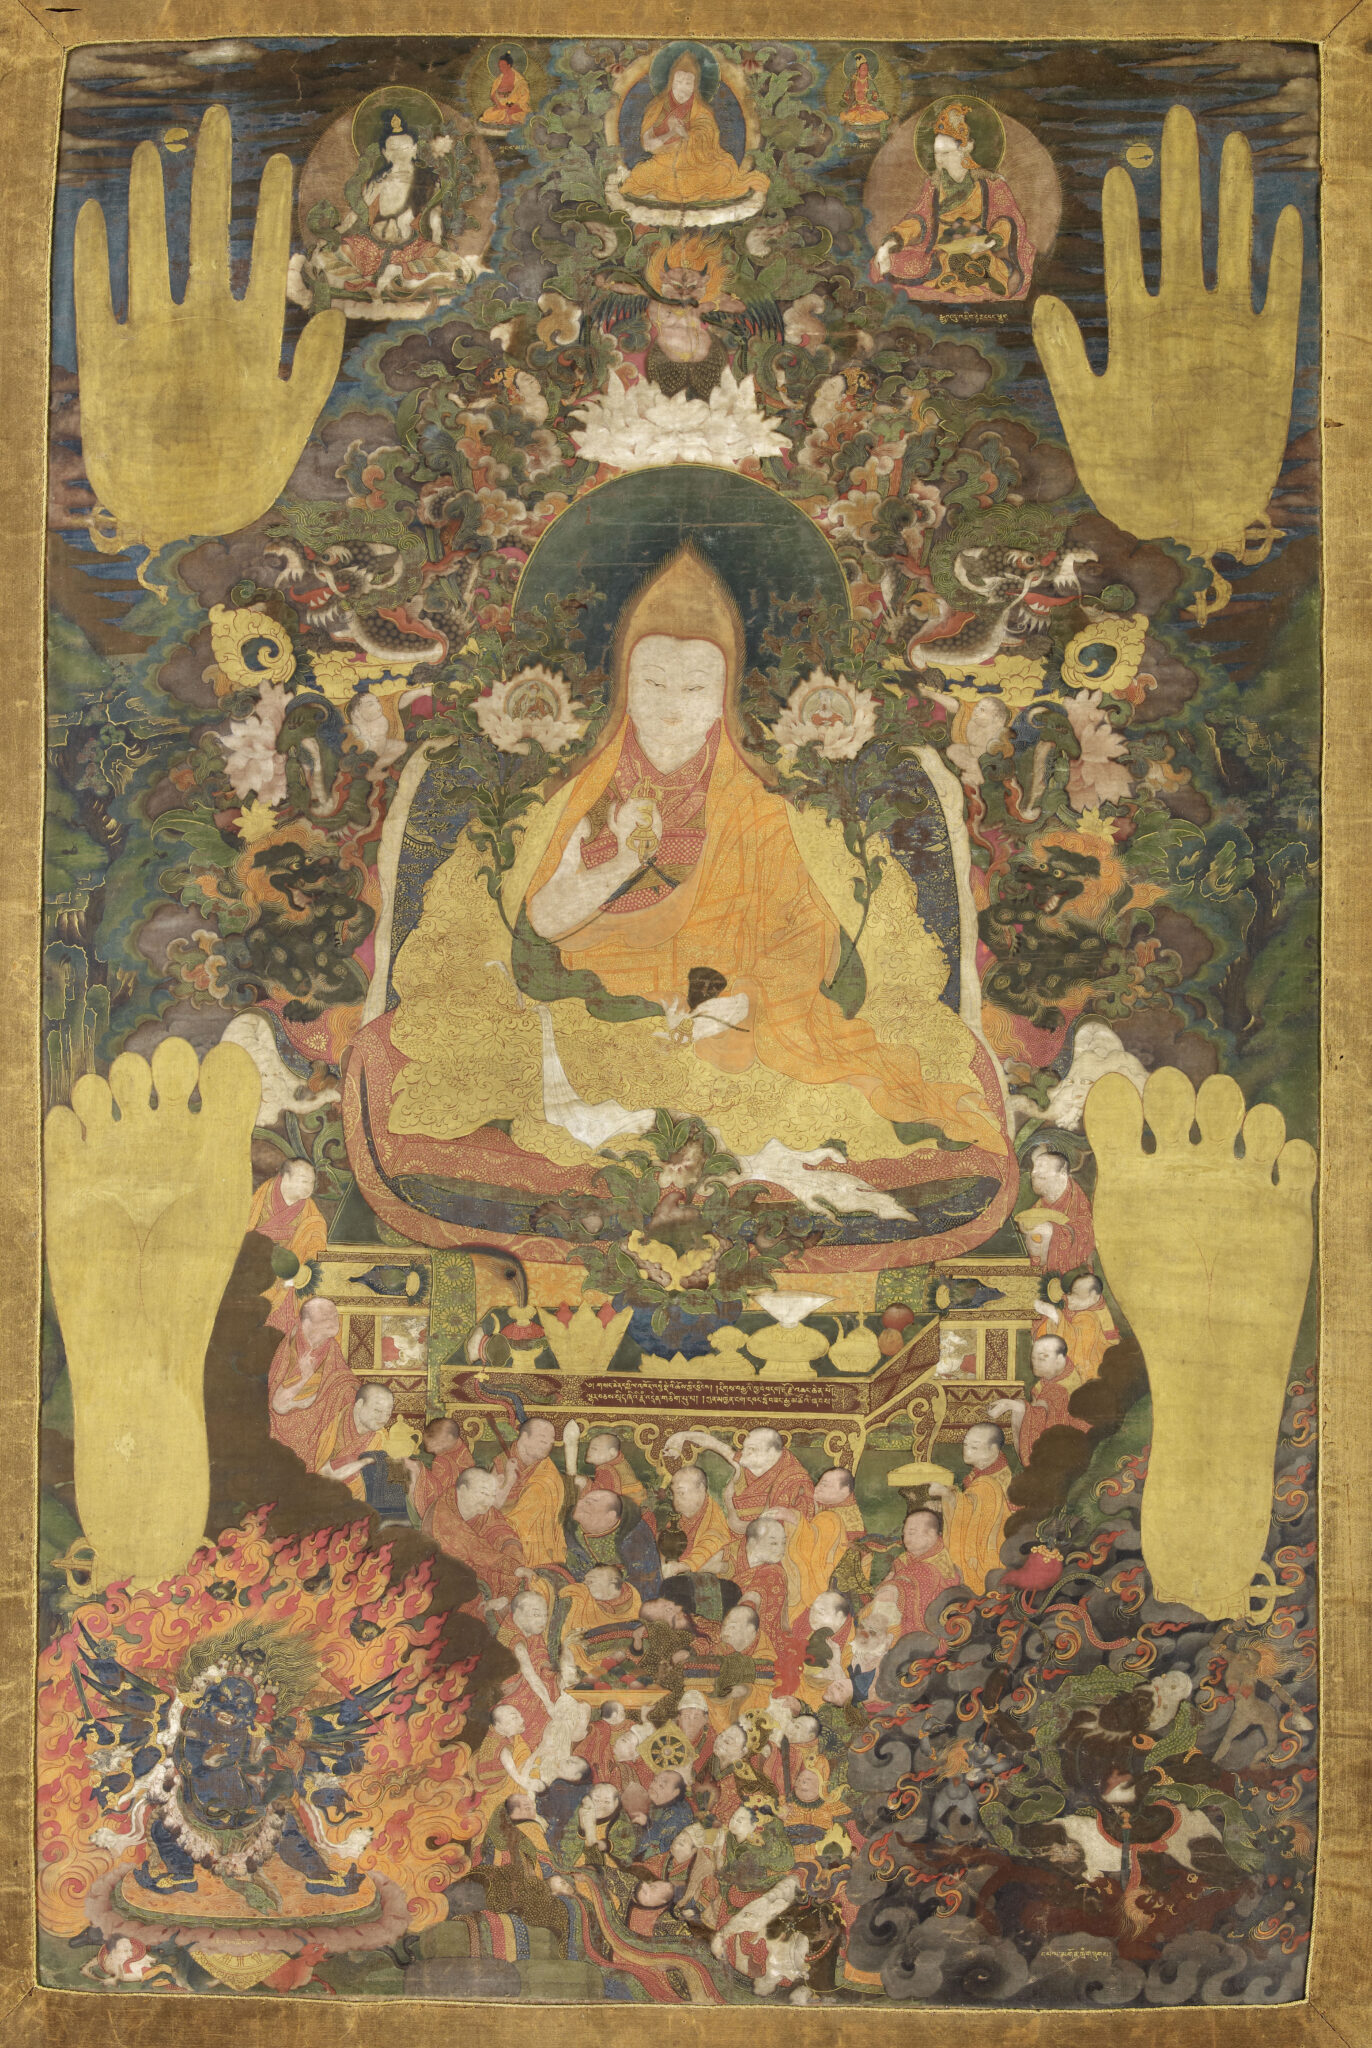 Two handprints and two footprints frame Dalai Lama seated above crowd of attendants and wrathful deity